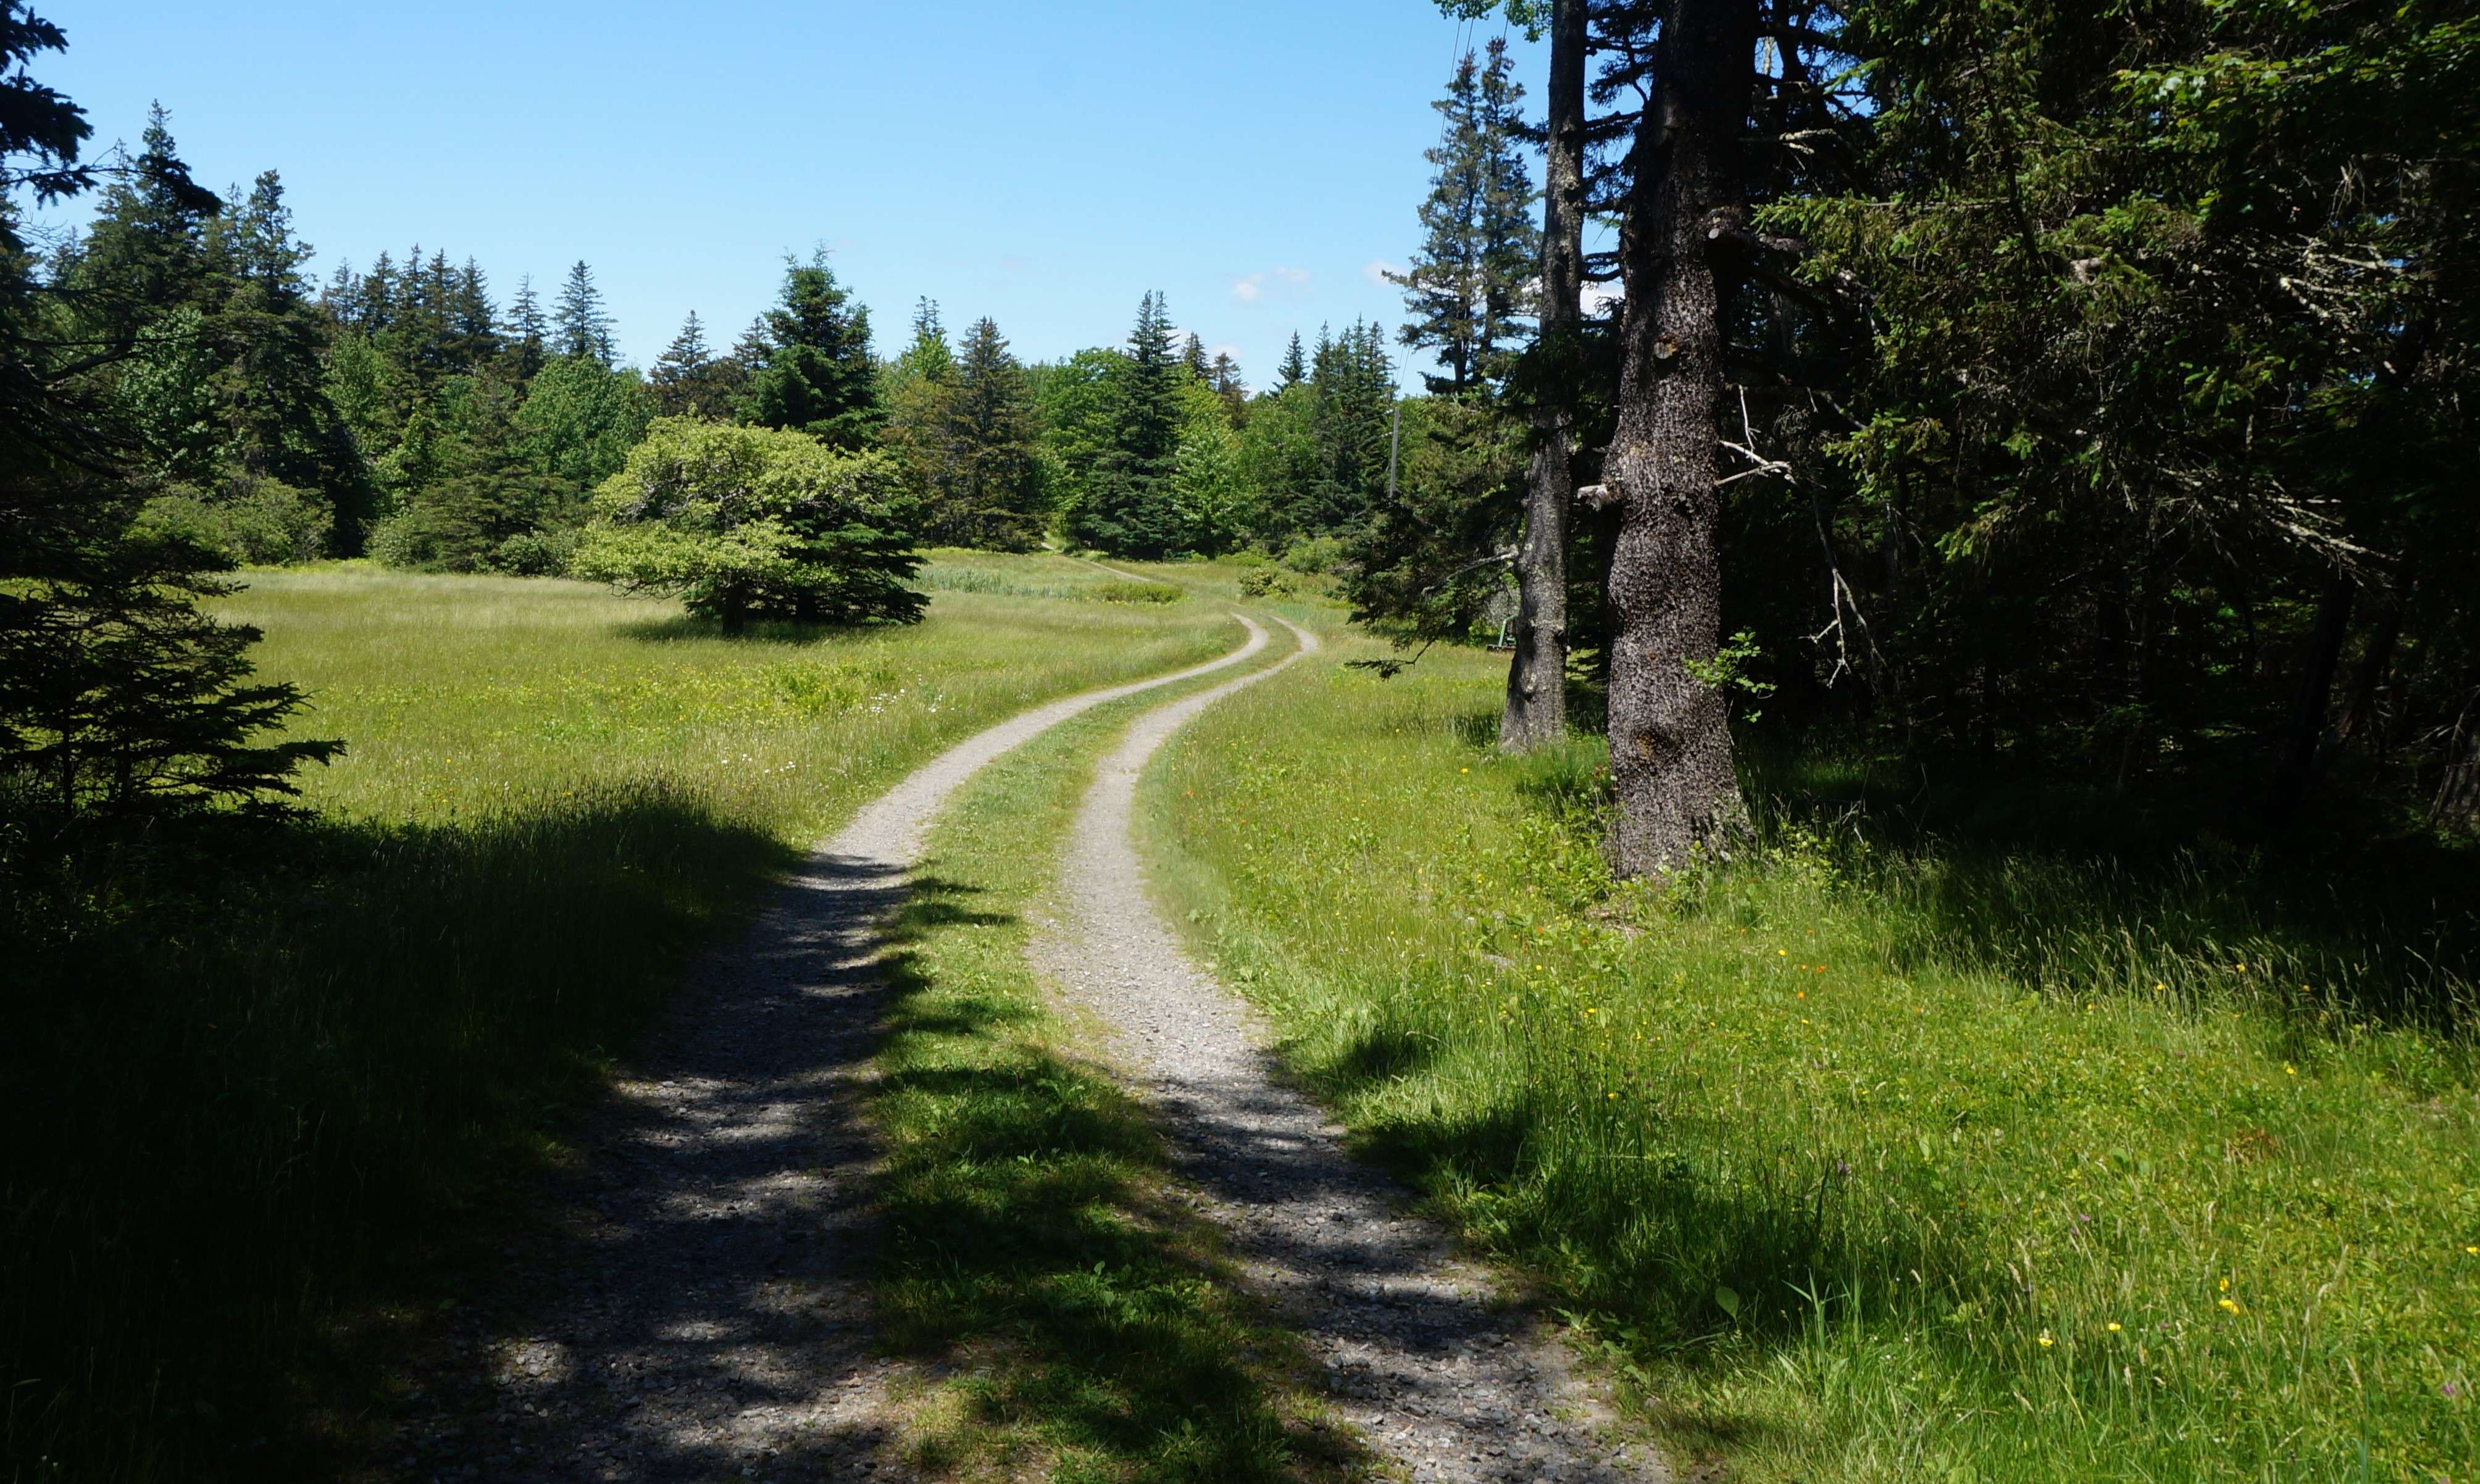 An old dirt road through a sun-dappled field with pine trees surrounding it